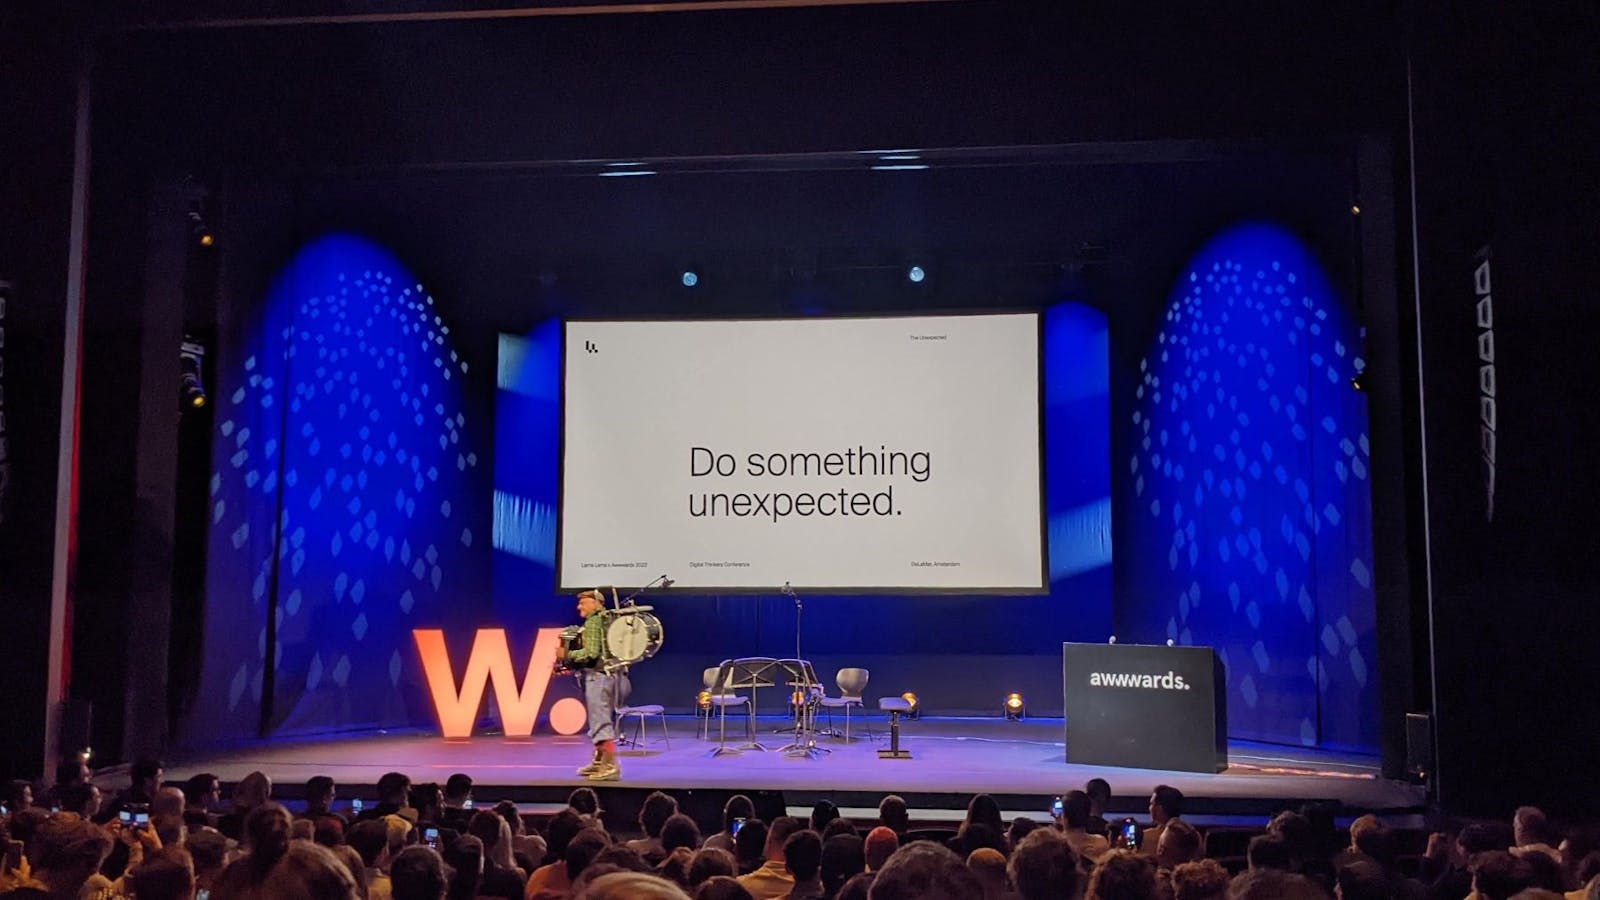 Awwwards 2022 quote on stage - Do something unexpected